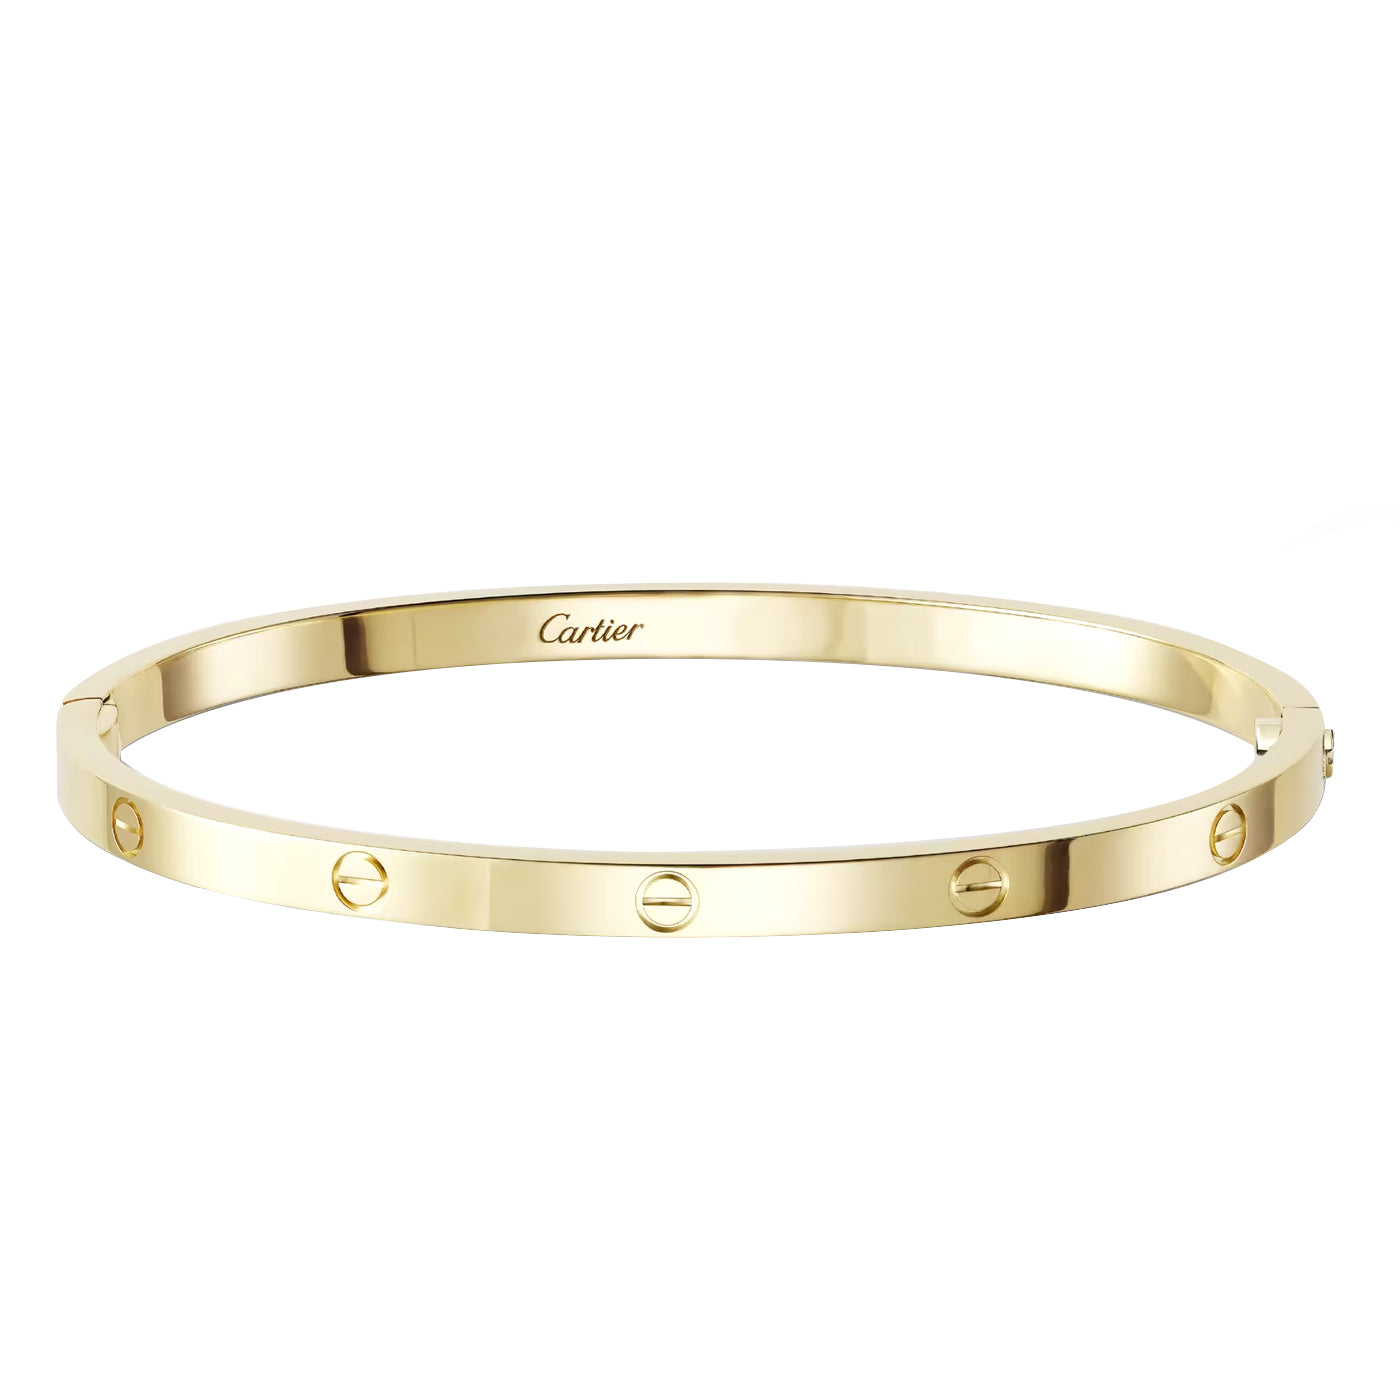 Cartier Love Bracelet 18K Yellow Gold Size 15 Small Model With a Screwdriver